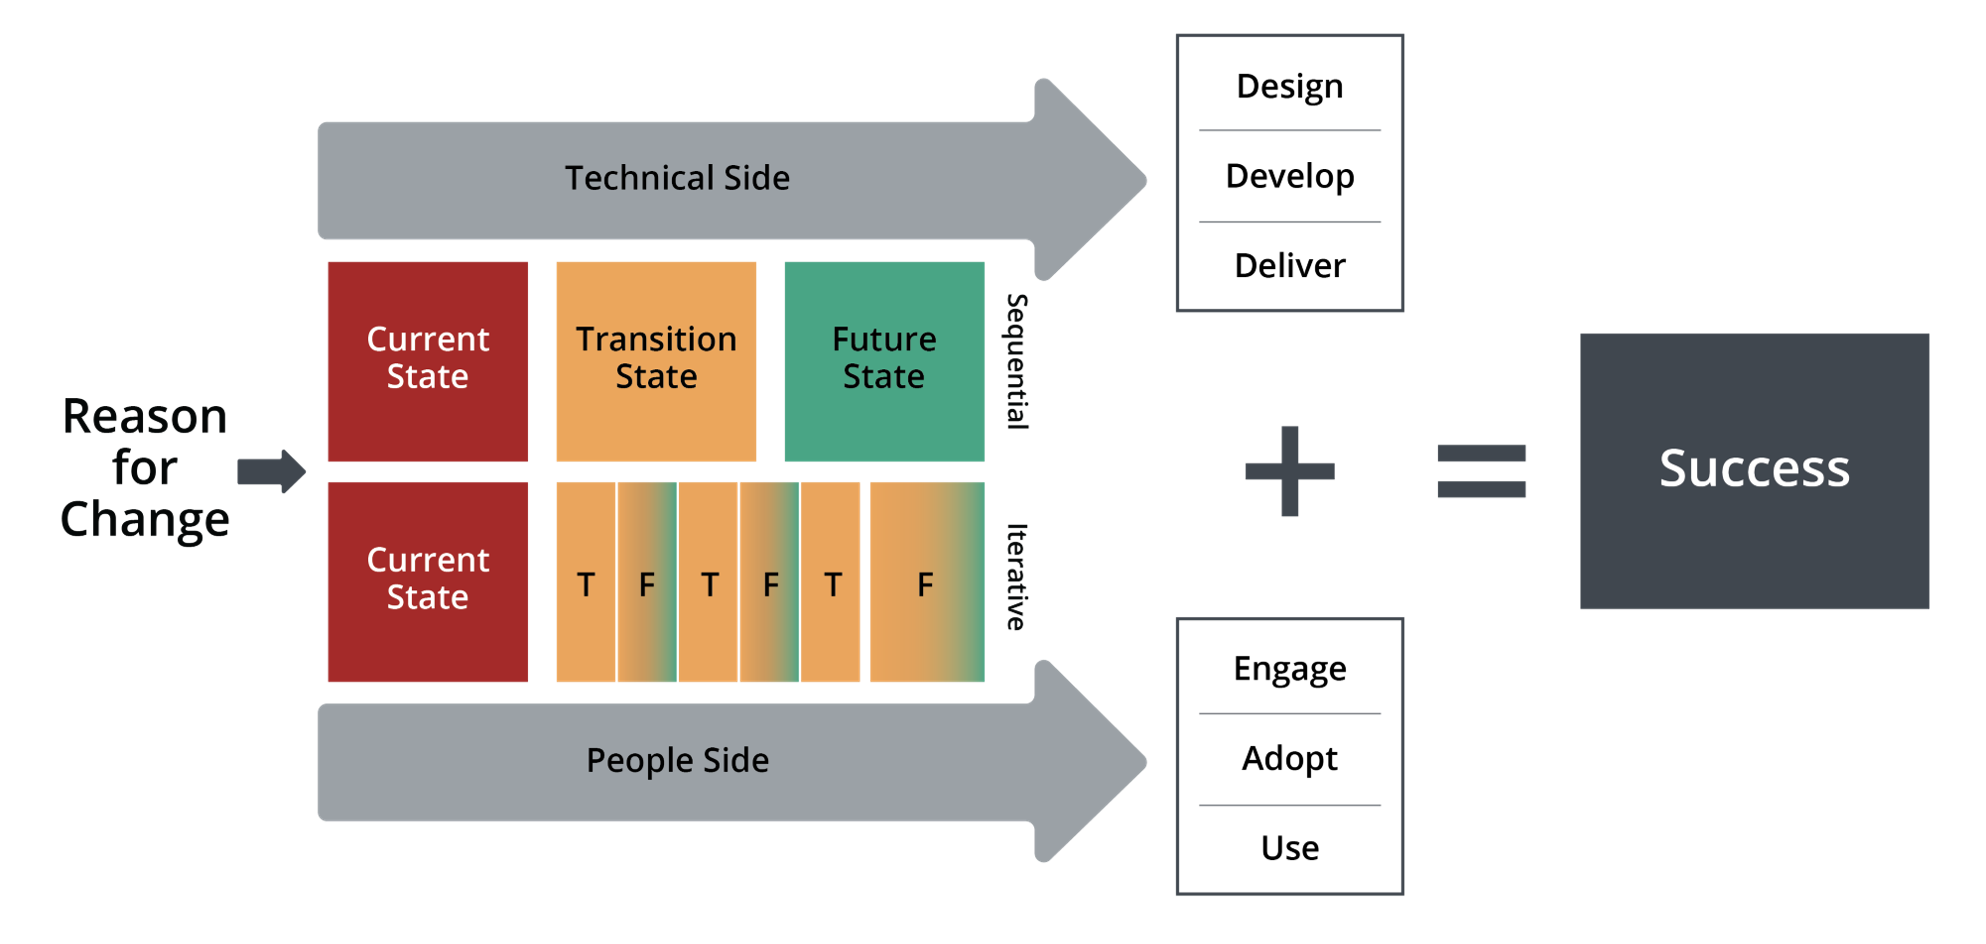 systems model of change